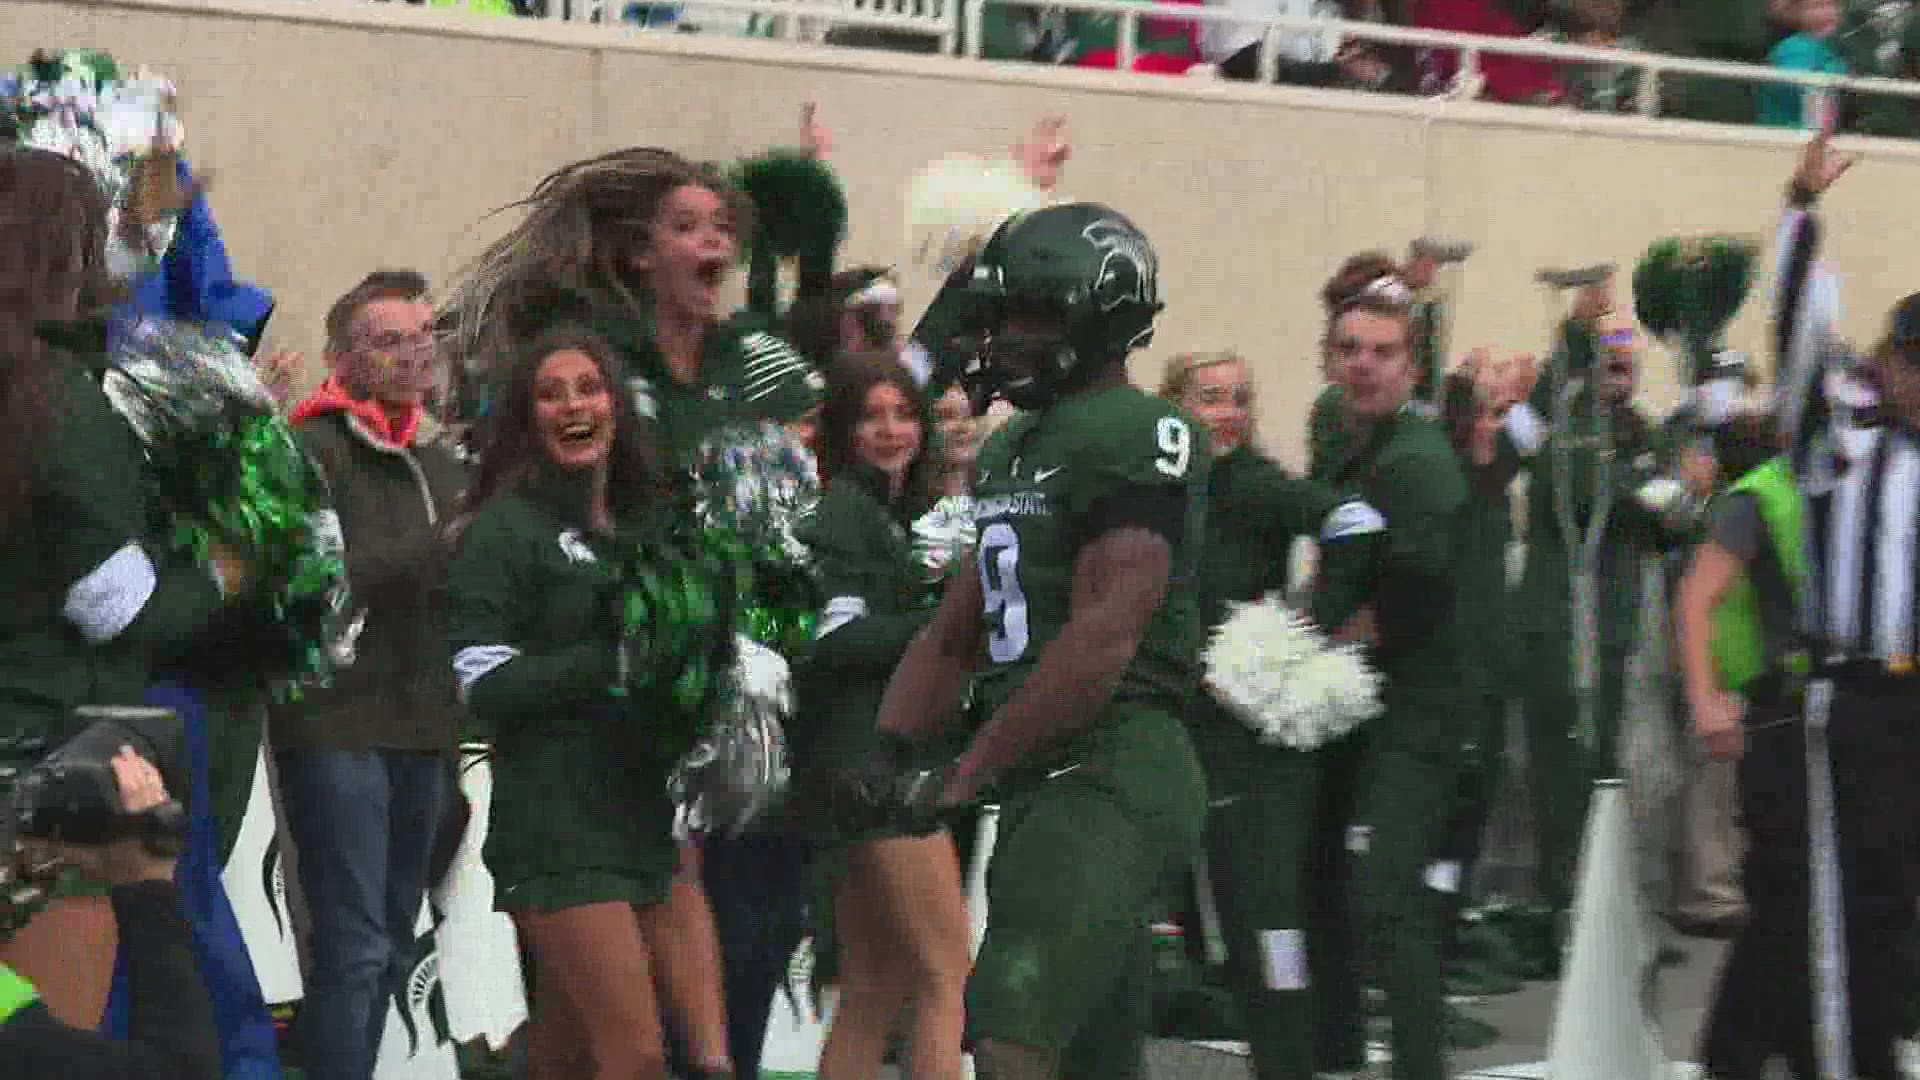 Kenneth Walker III brought MSU to victory in a barn burner game Saturday. They're now 8-0.